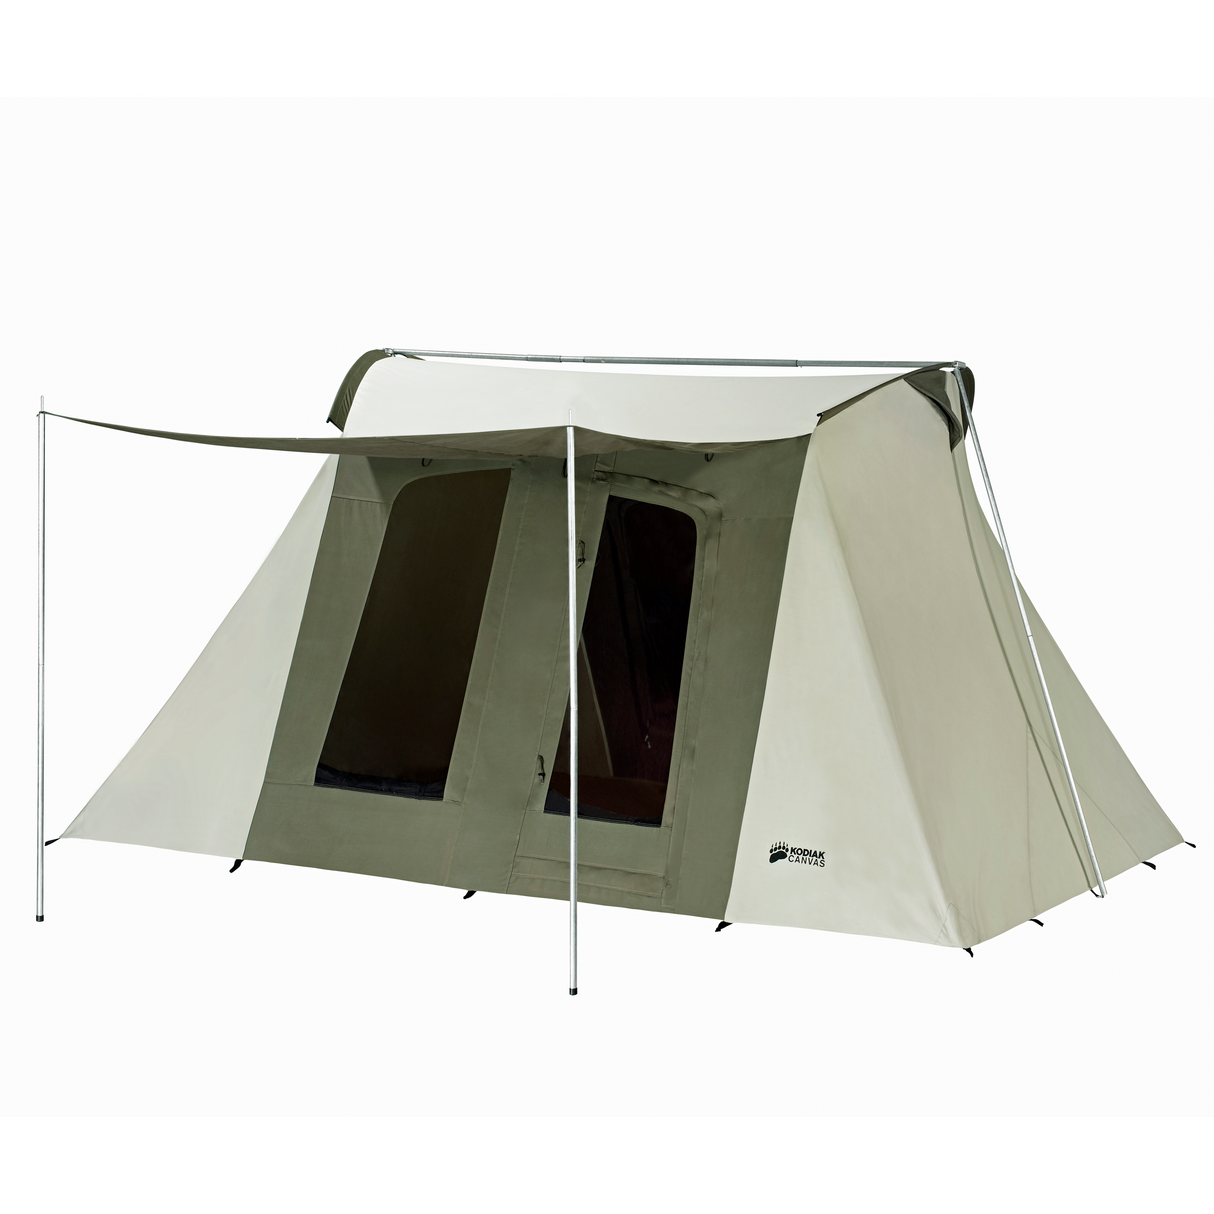 10 x 14 ft. Flex-Bow Deluxe Canvas Camping Tent